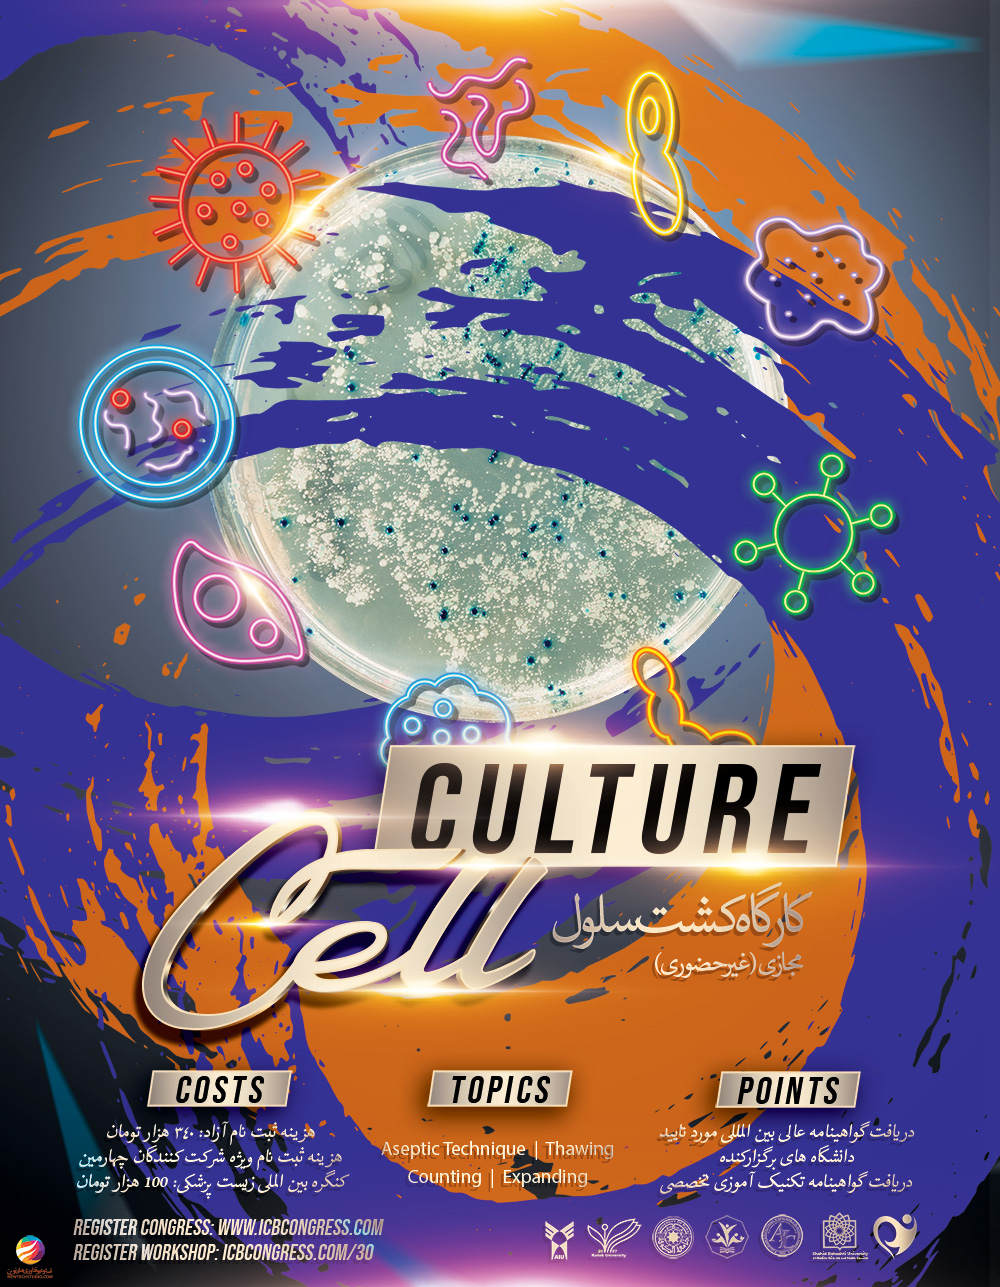 Cell Culture Workshops